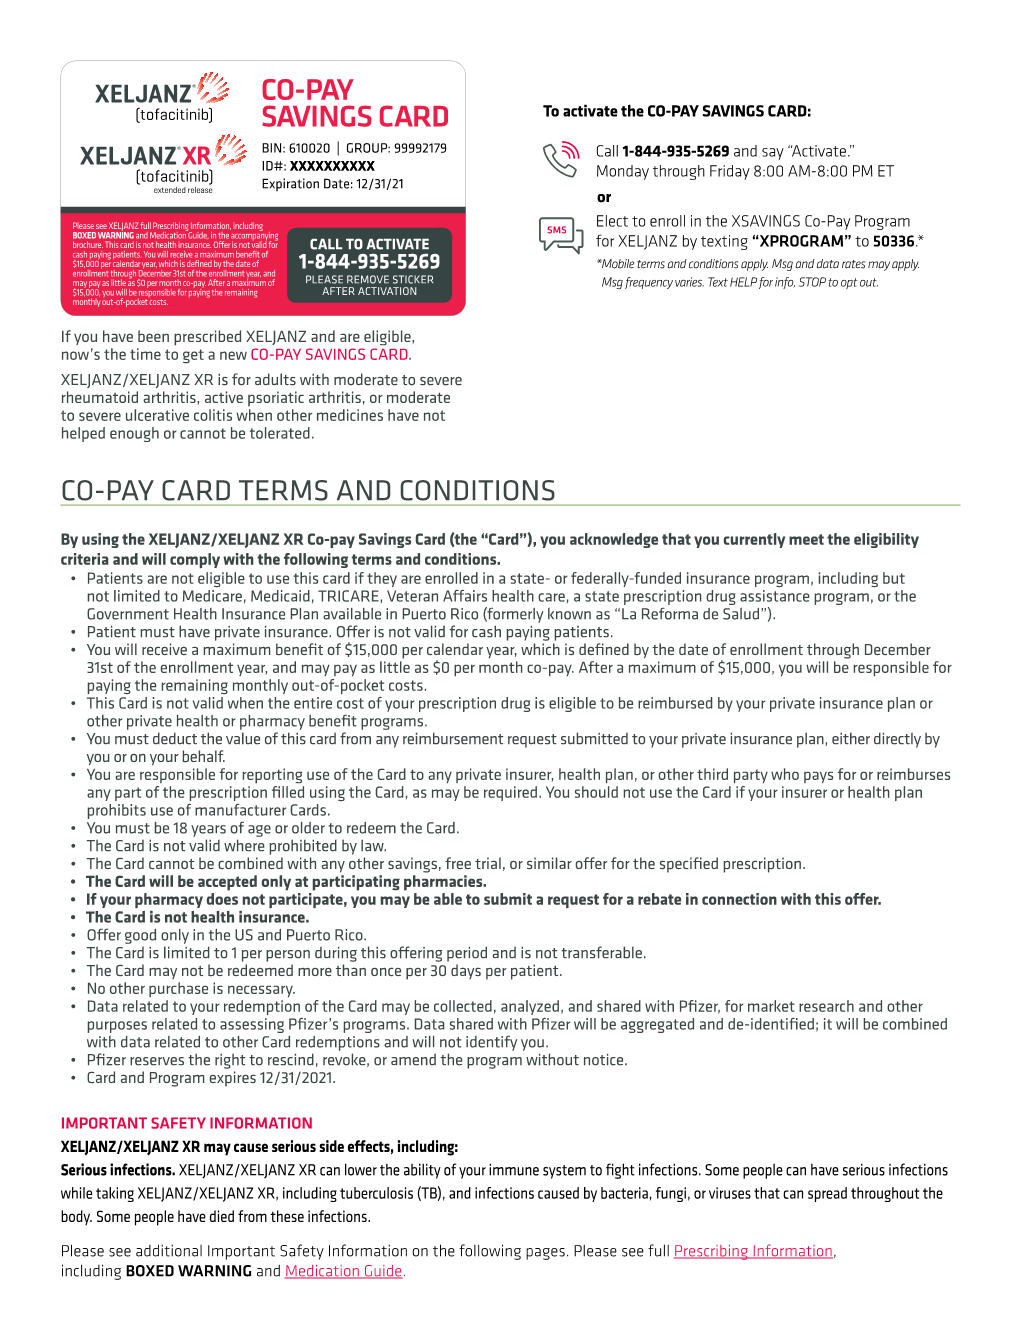 Co-Pay Card Terms and Conditions